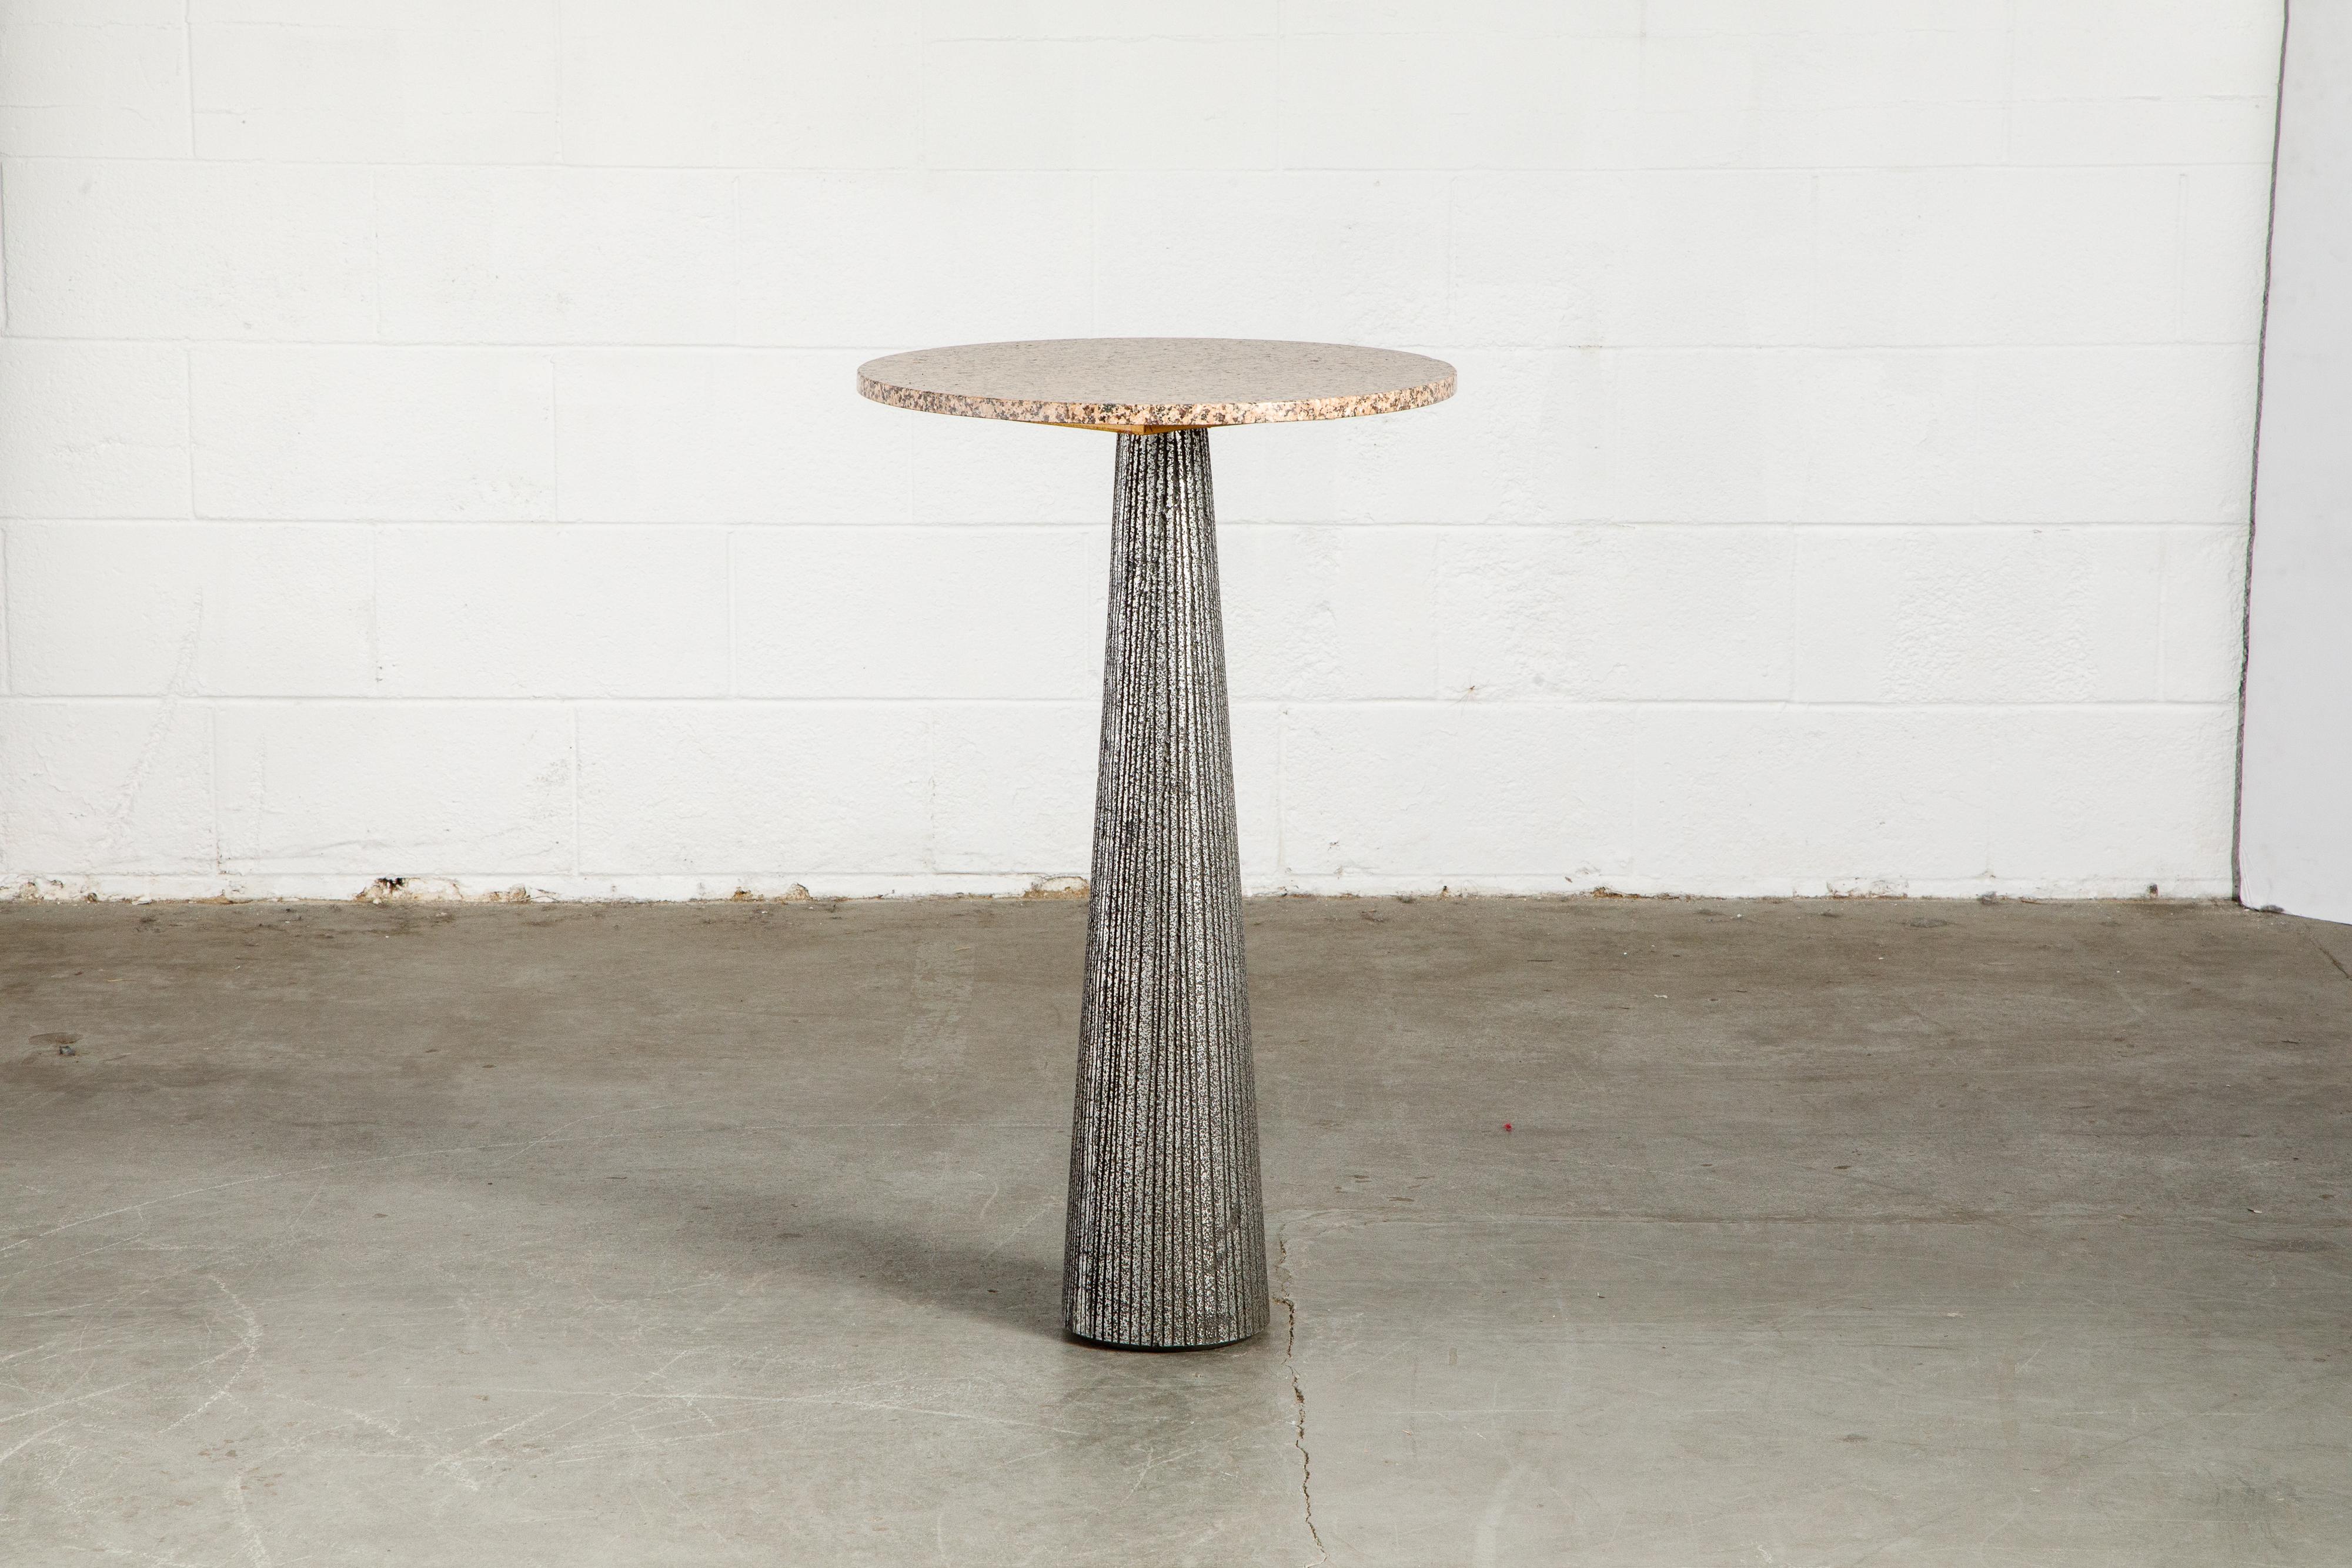 An incredible Brutalist occasional table with a beautiful rose pink granite top and a Brutalist enameled aluminum pedestal base by Forms + Surfaces, circa 1968. This spectacular piece is tall, allowing you to use it in a lot of ways that shorter